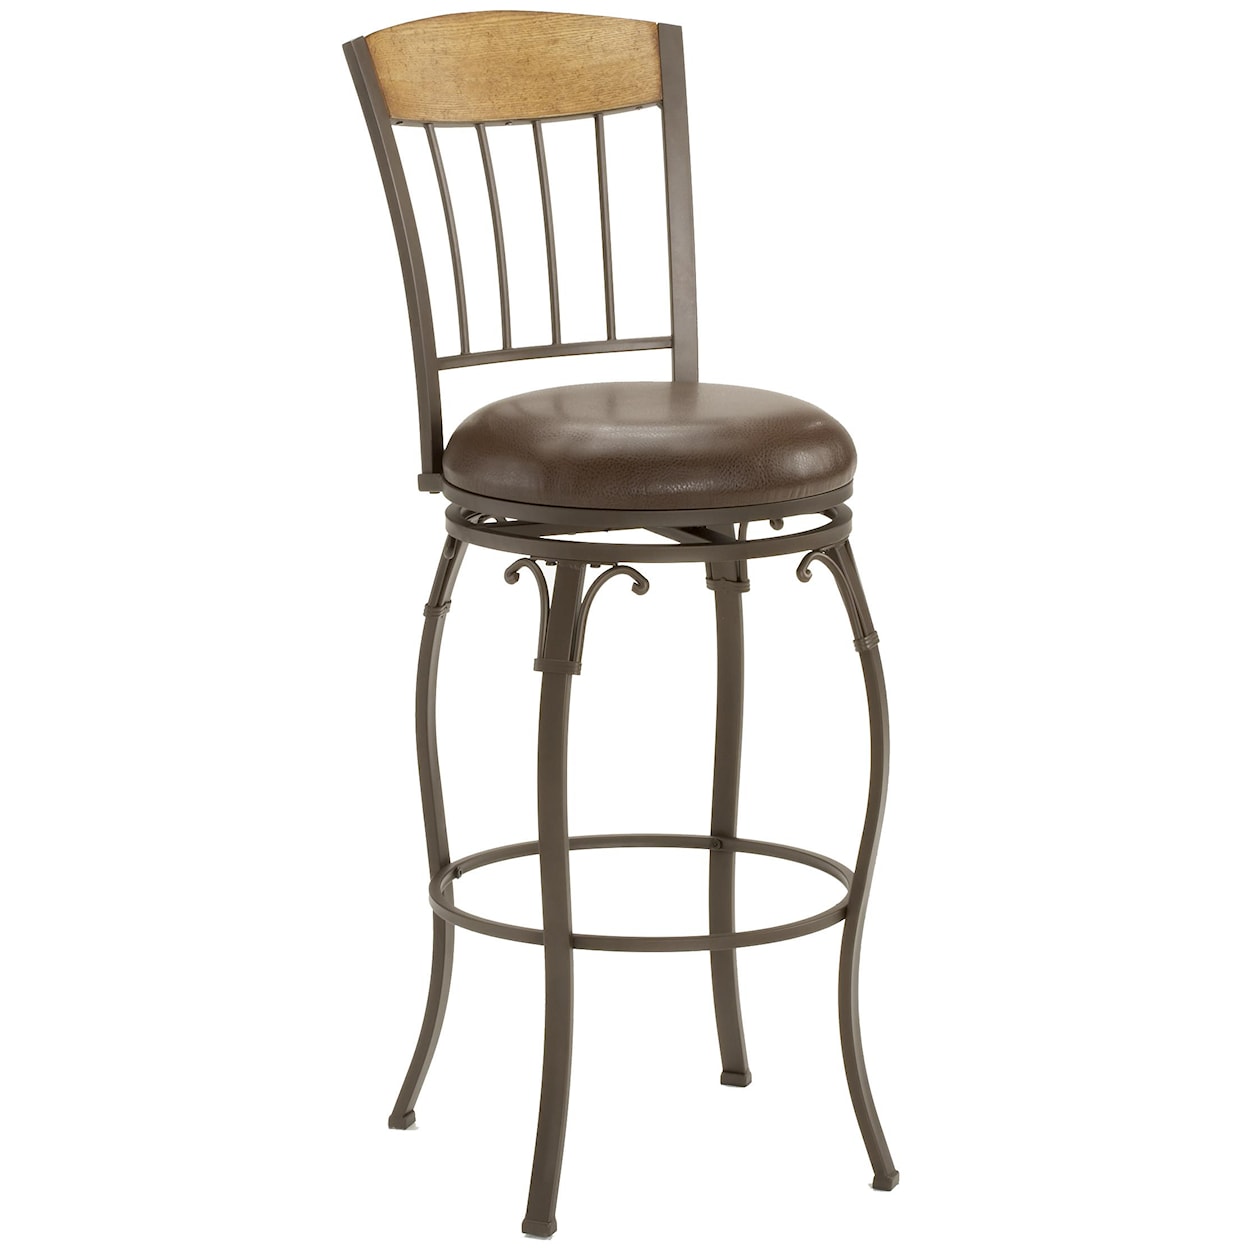 Hillsdale Bar Stools 24" Counter Height Lakeview Swivel Stool